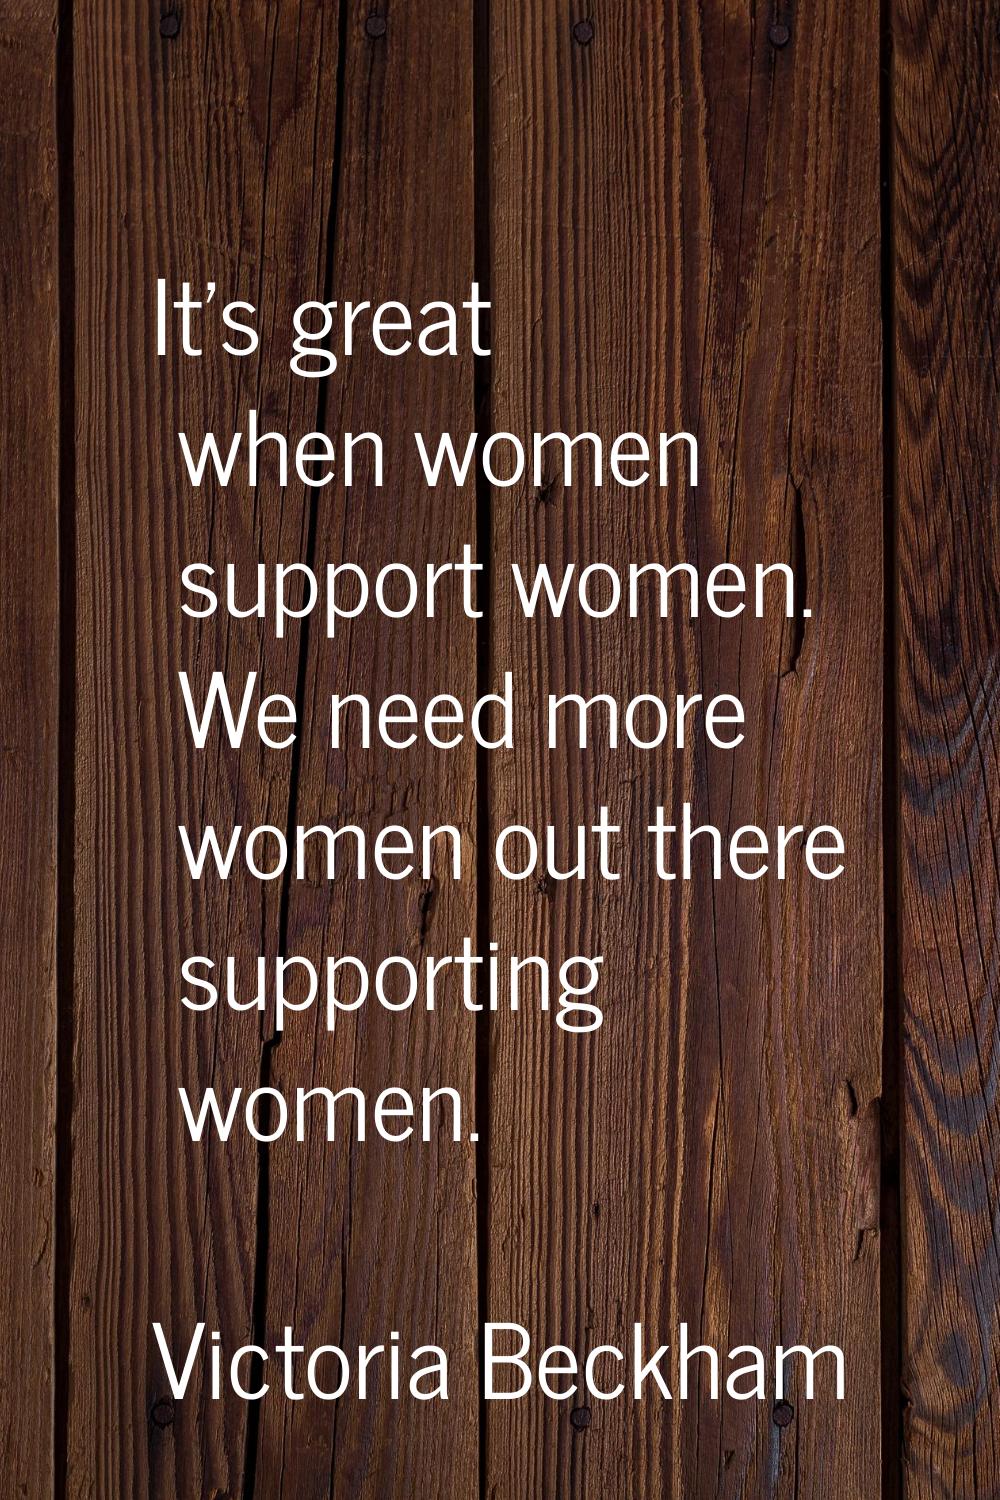 It's great when women support women. We need more women out there supporting women.